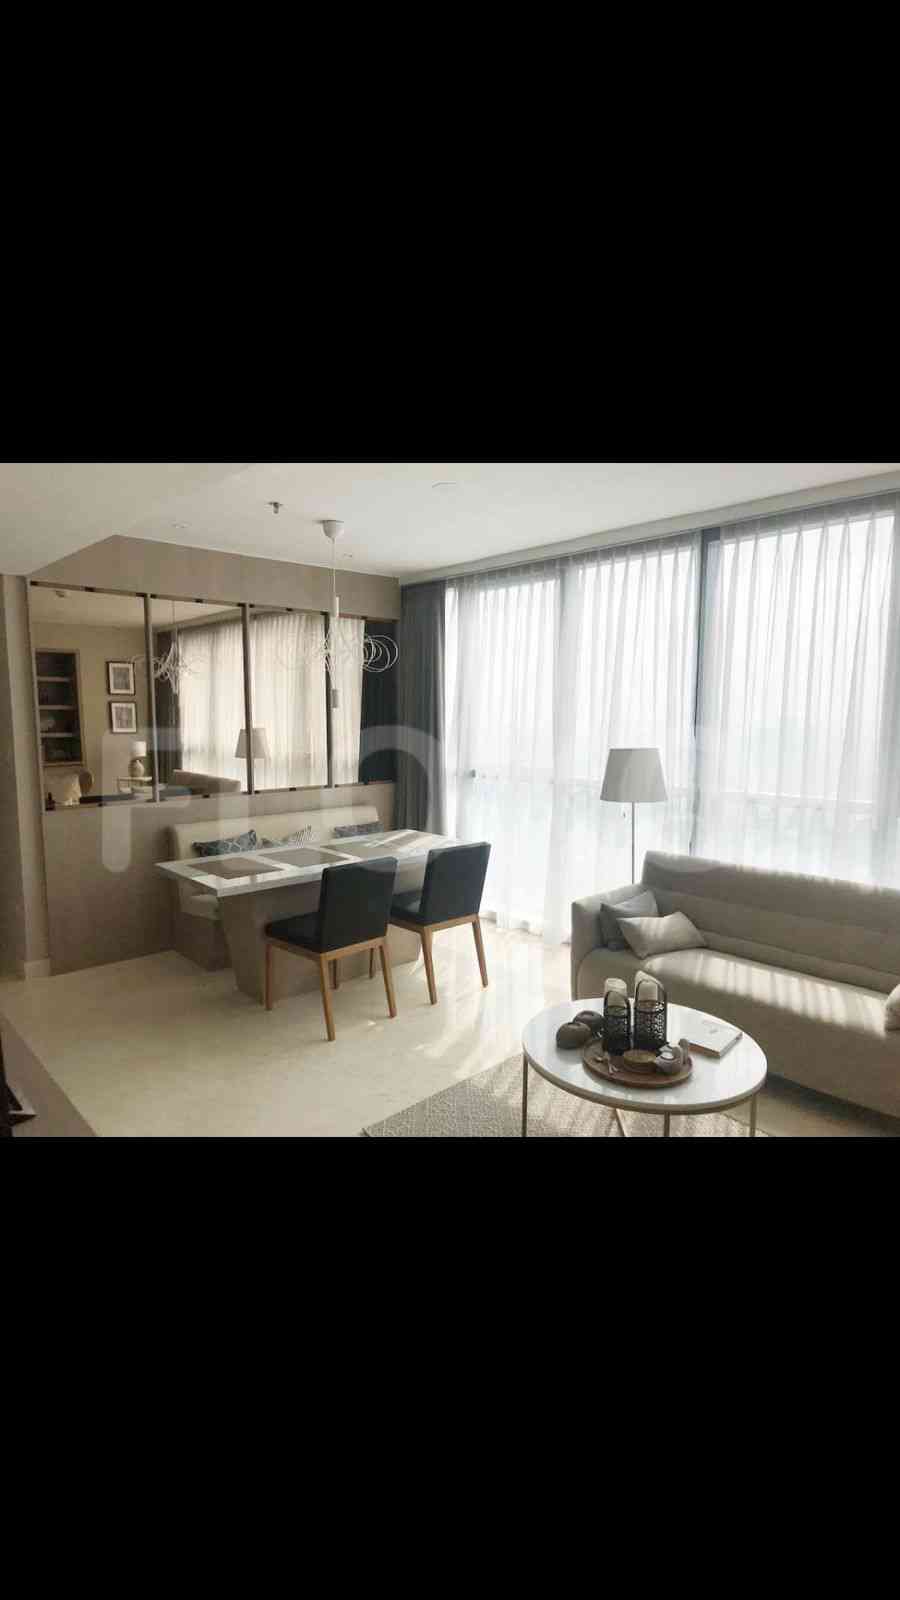 1 Bedroom on 46th Floor for Rent in Ciputra World 2 Apartment - fkuc72 4